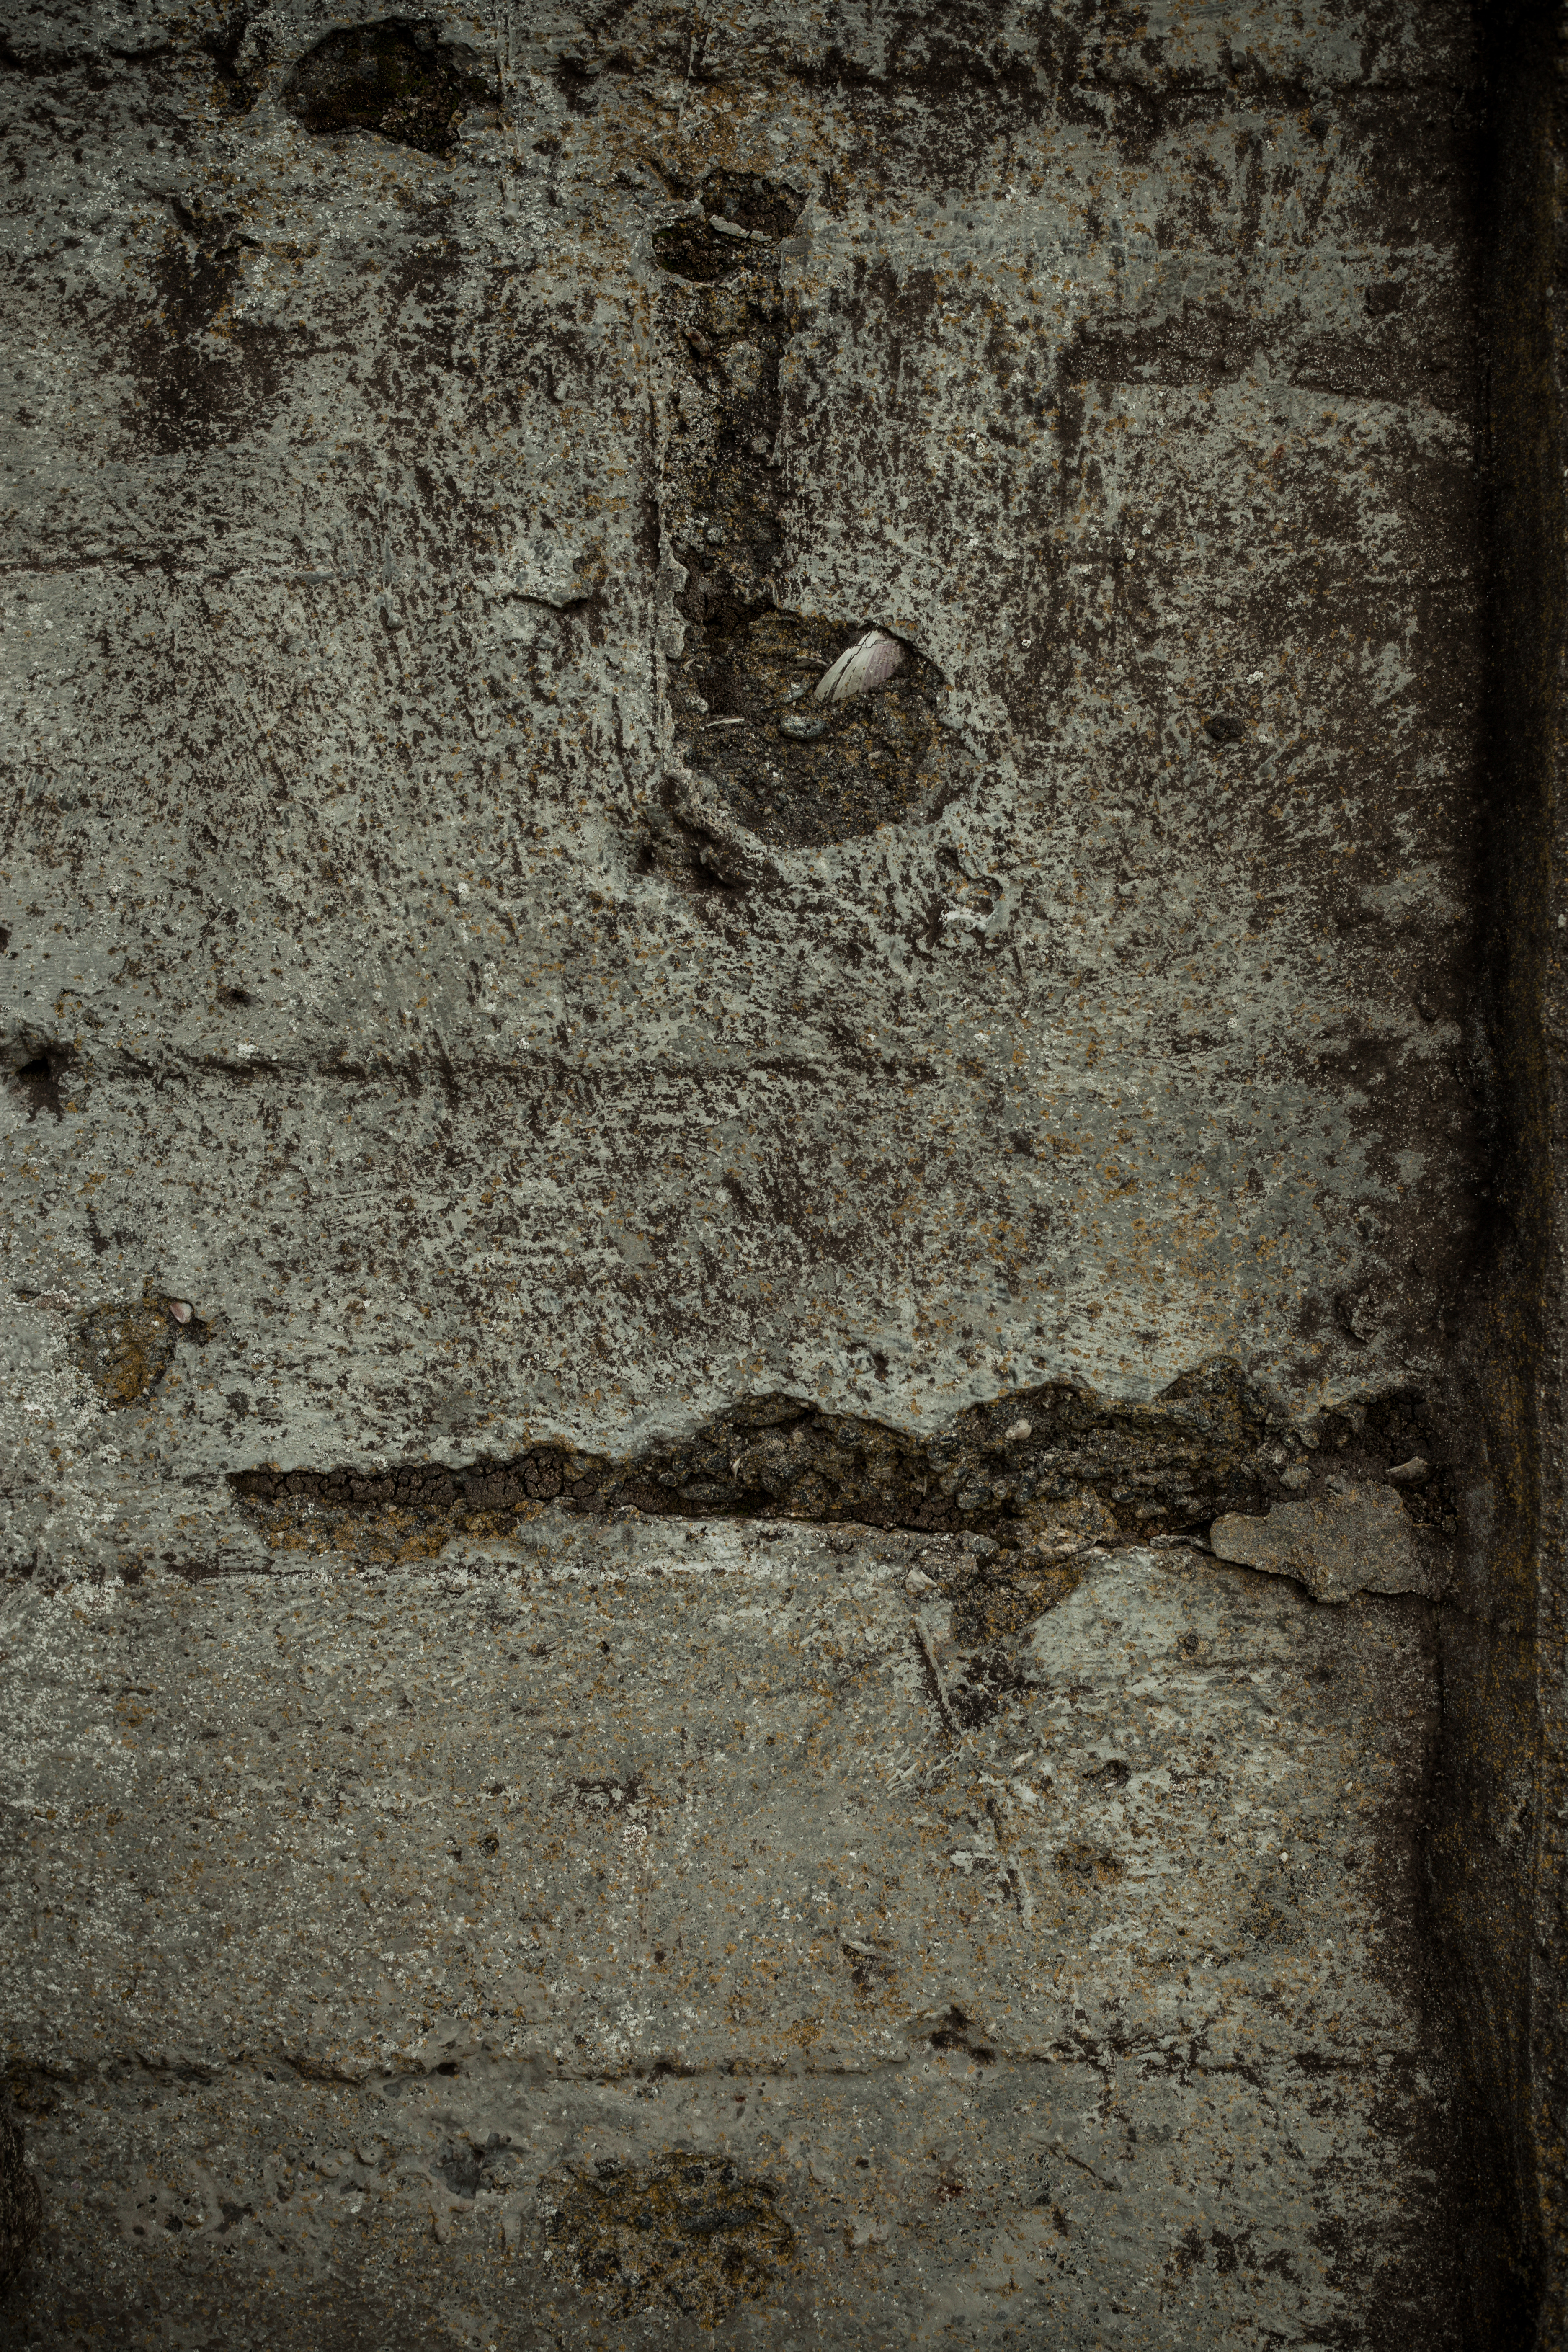 Cracked Old Concrete Wall Texture, Chipped, Concrete, Cracked, Dark, HQ Photo